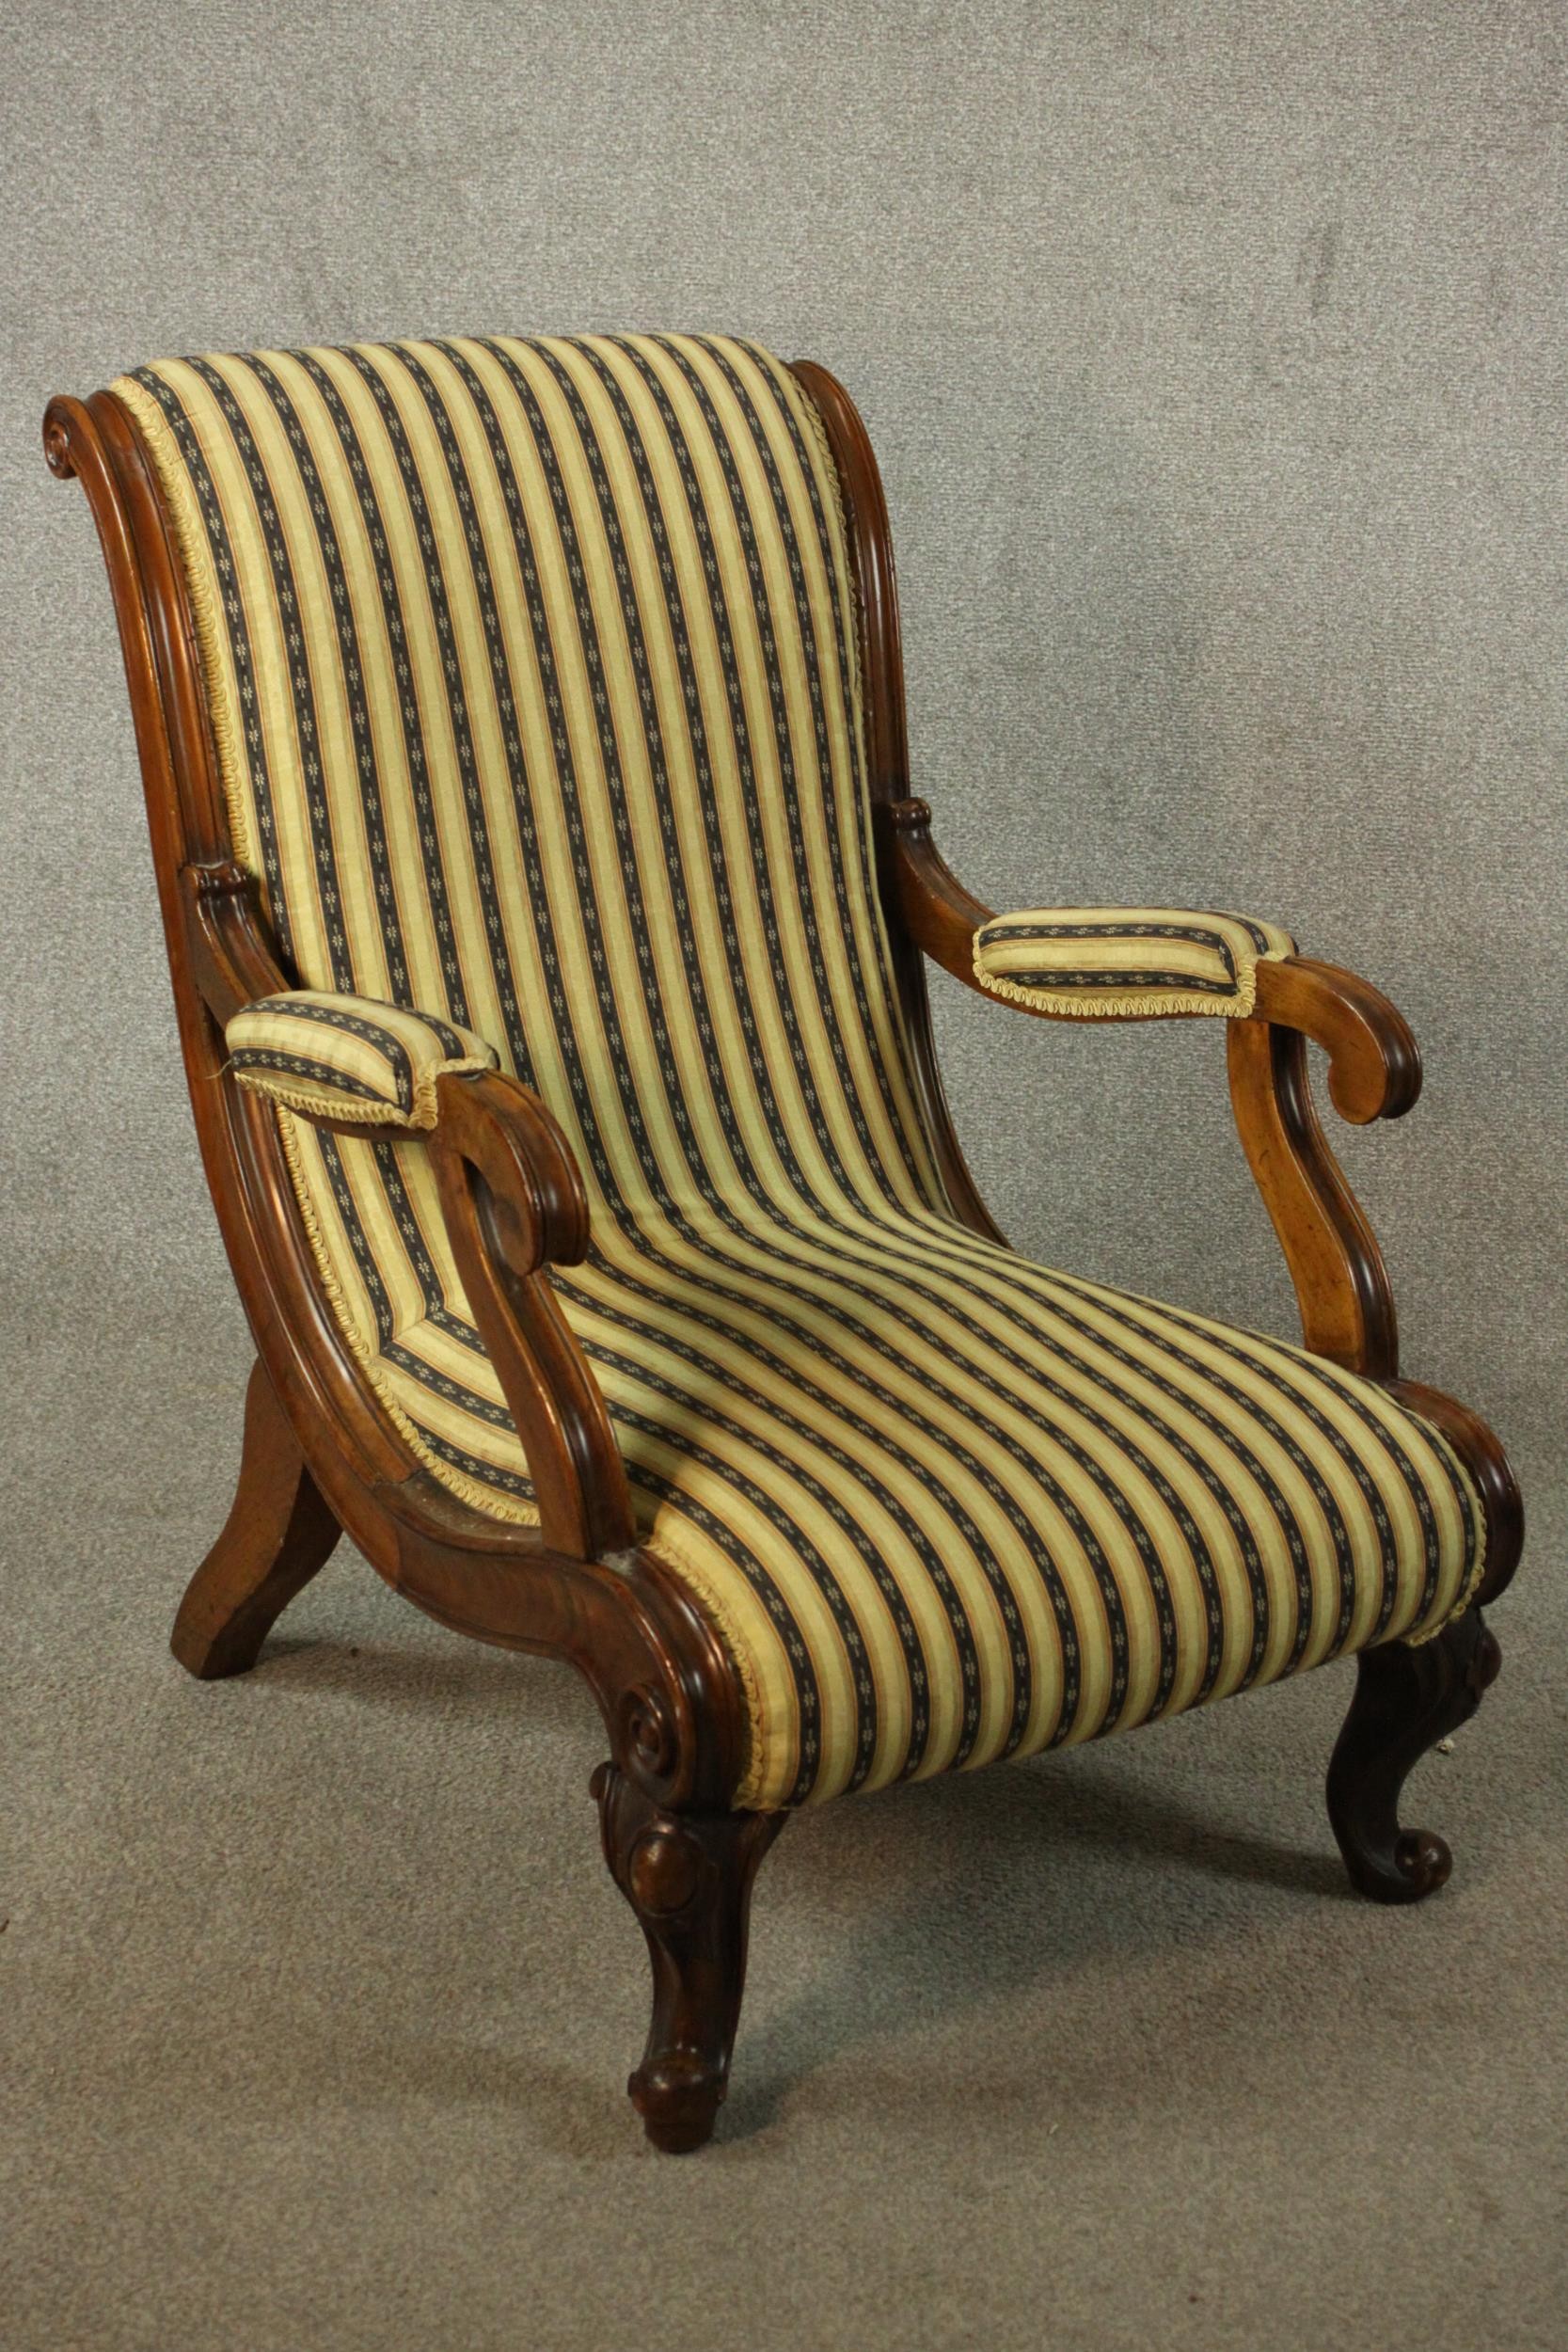 Two similar Victorian walnut slipper chairs, with striped upholstery, one with open arms, on - Image 4 of 21